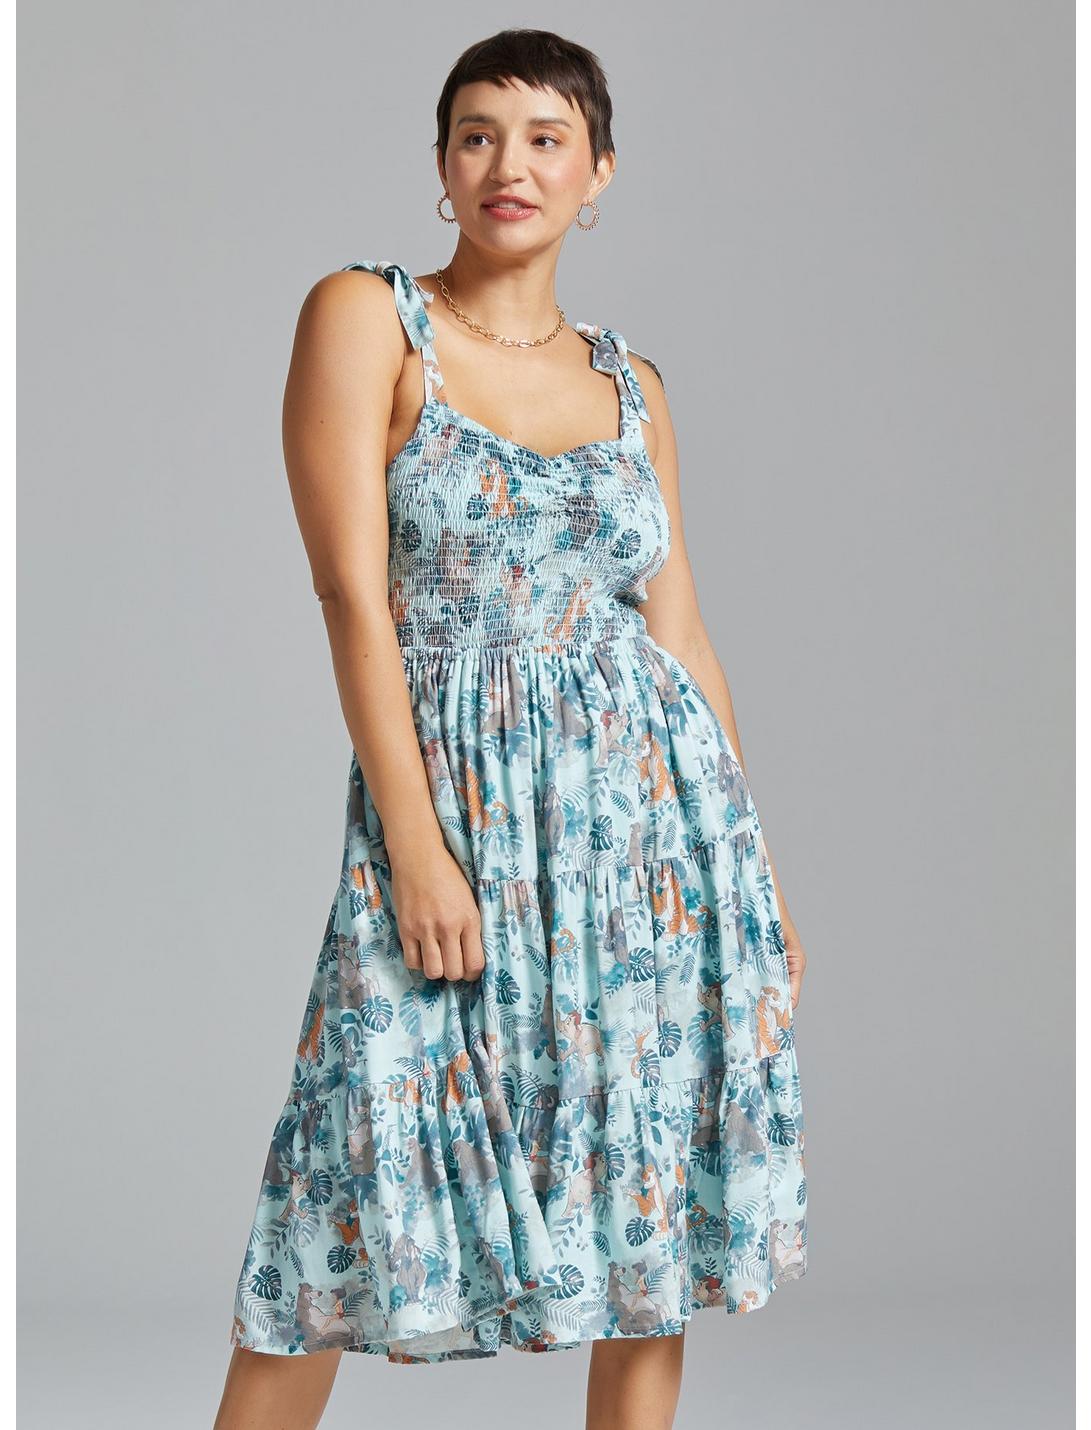 Disney The Jungle Book Botanical Character Allover Print Tank Dress - BoxLunch Exclusive, LIGHT BLUE, hi-res